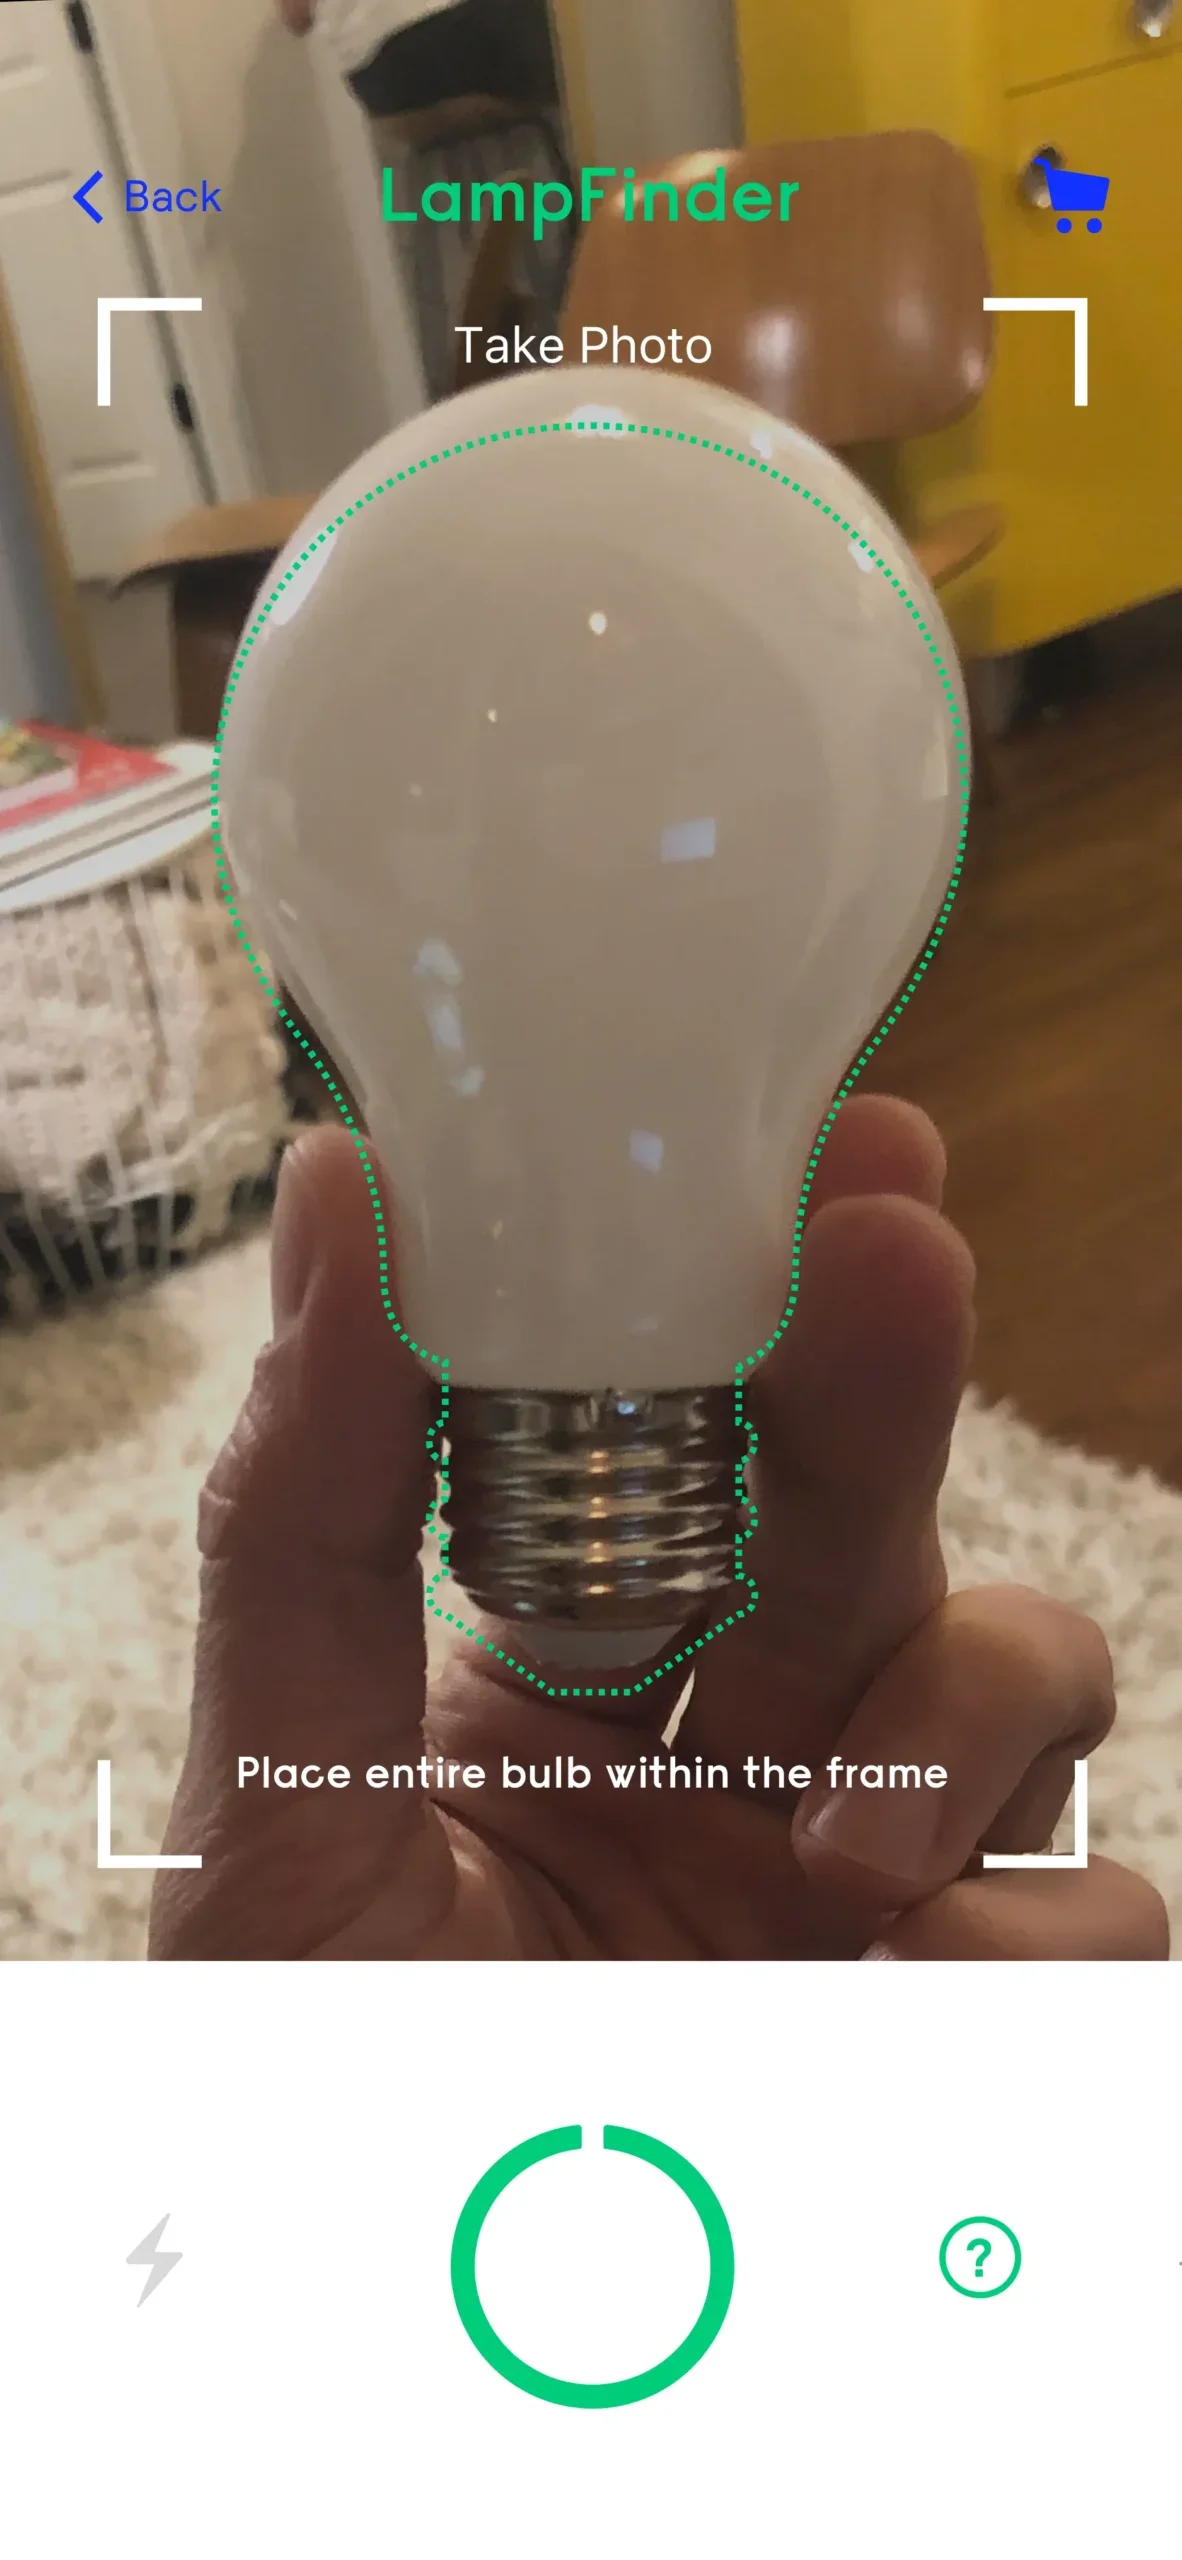 Philips Lightfinder - A new way to find bulb